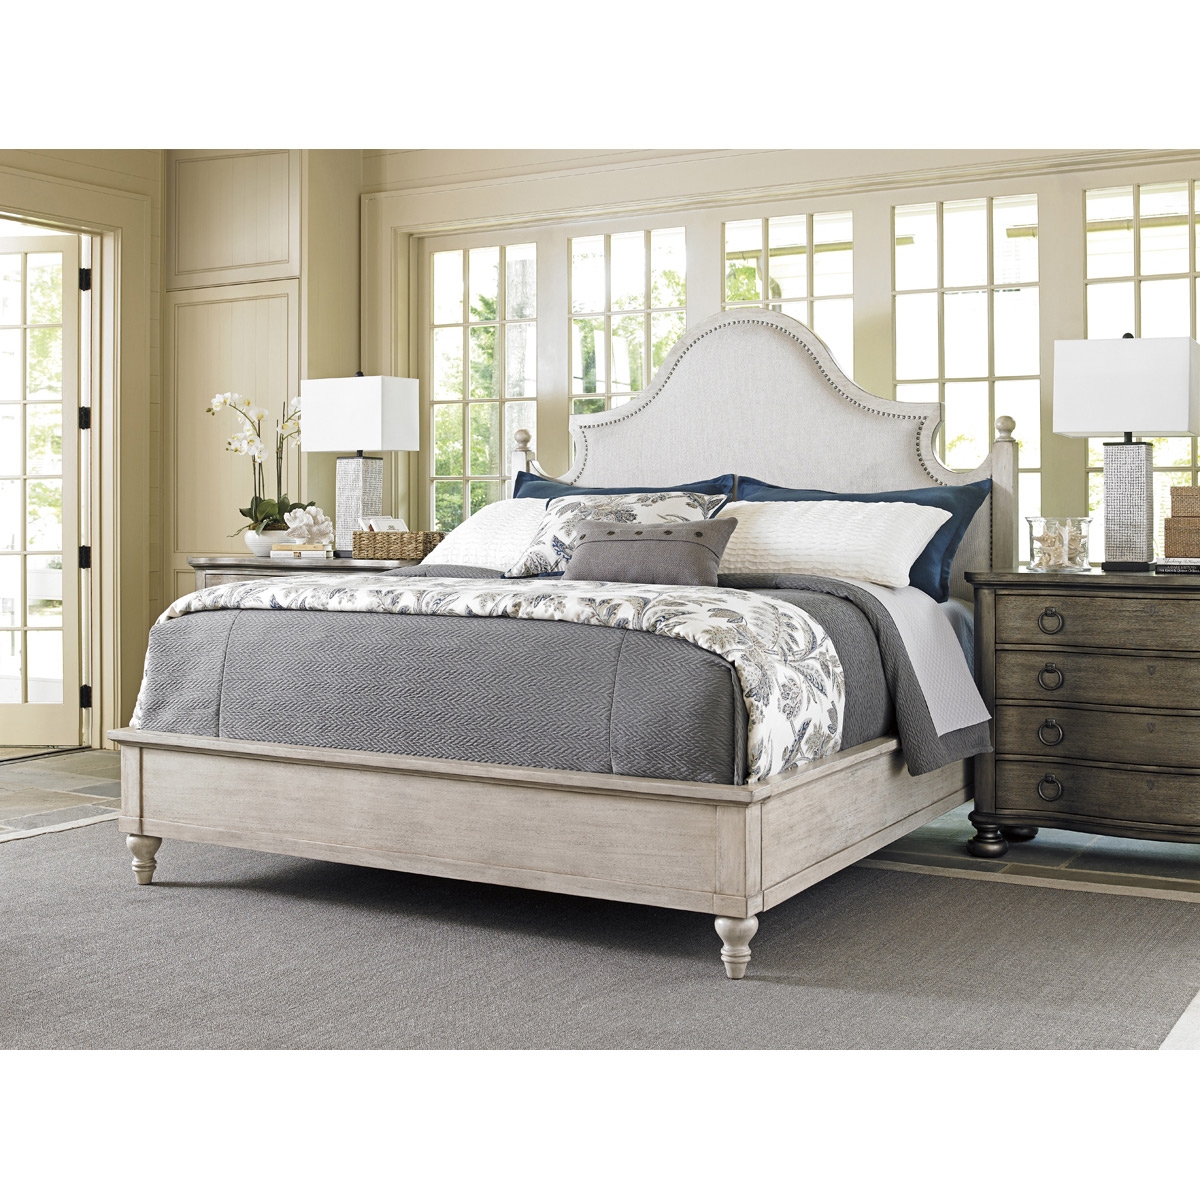 Lexington Arbor Hills French Country Grey Upholstered White Oyster Bed - King - Image 1